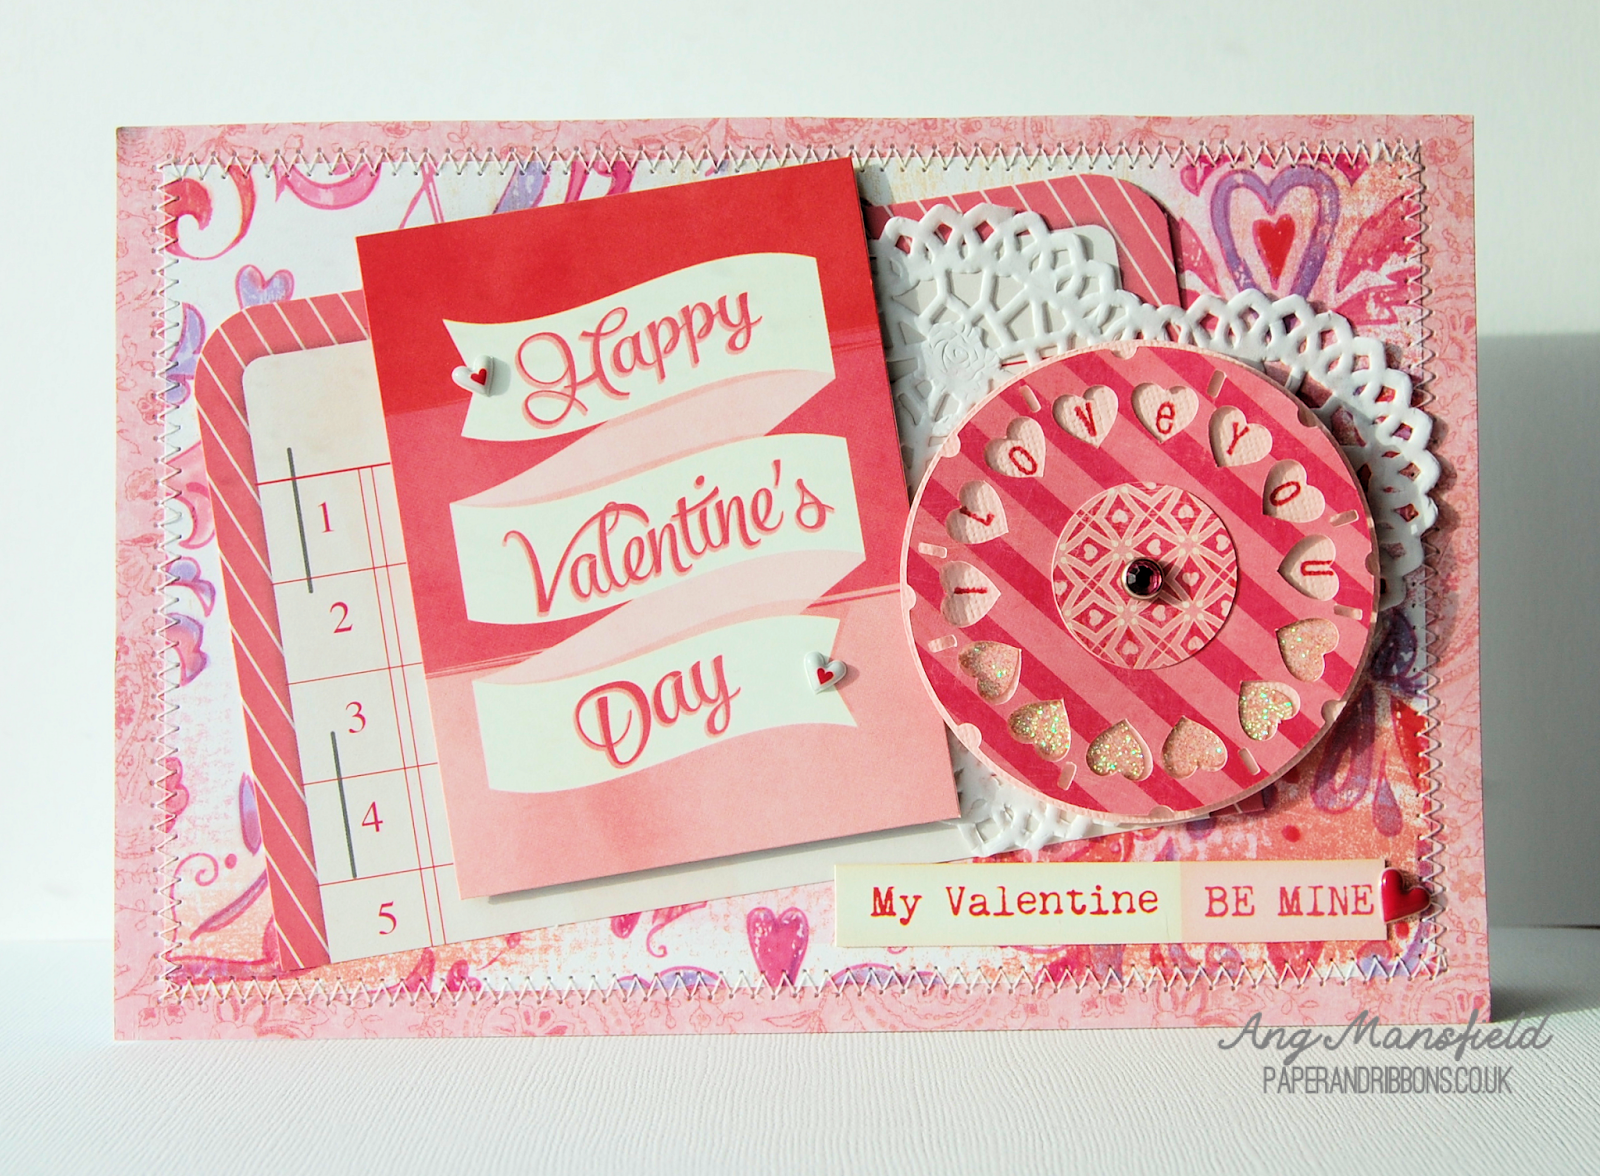 6 Cards for Valentine's Day by Ang Mansfield of Paper and Ribbons